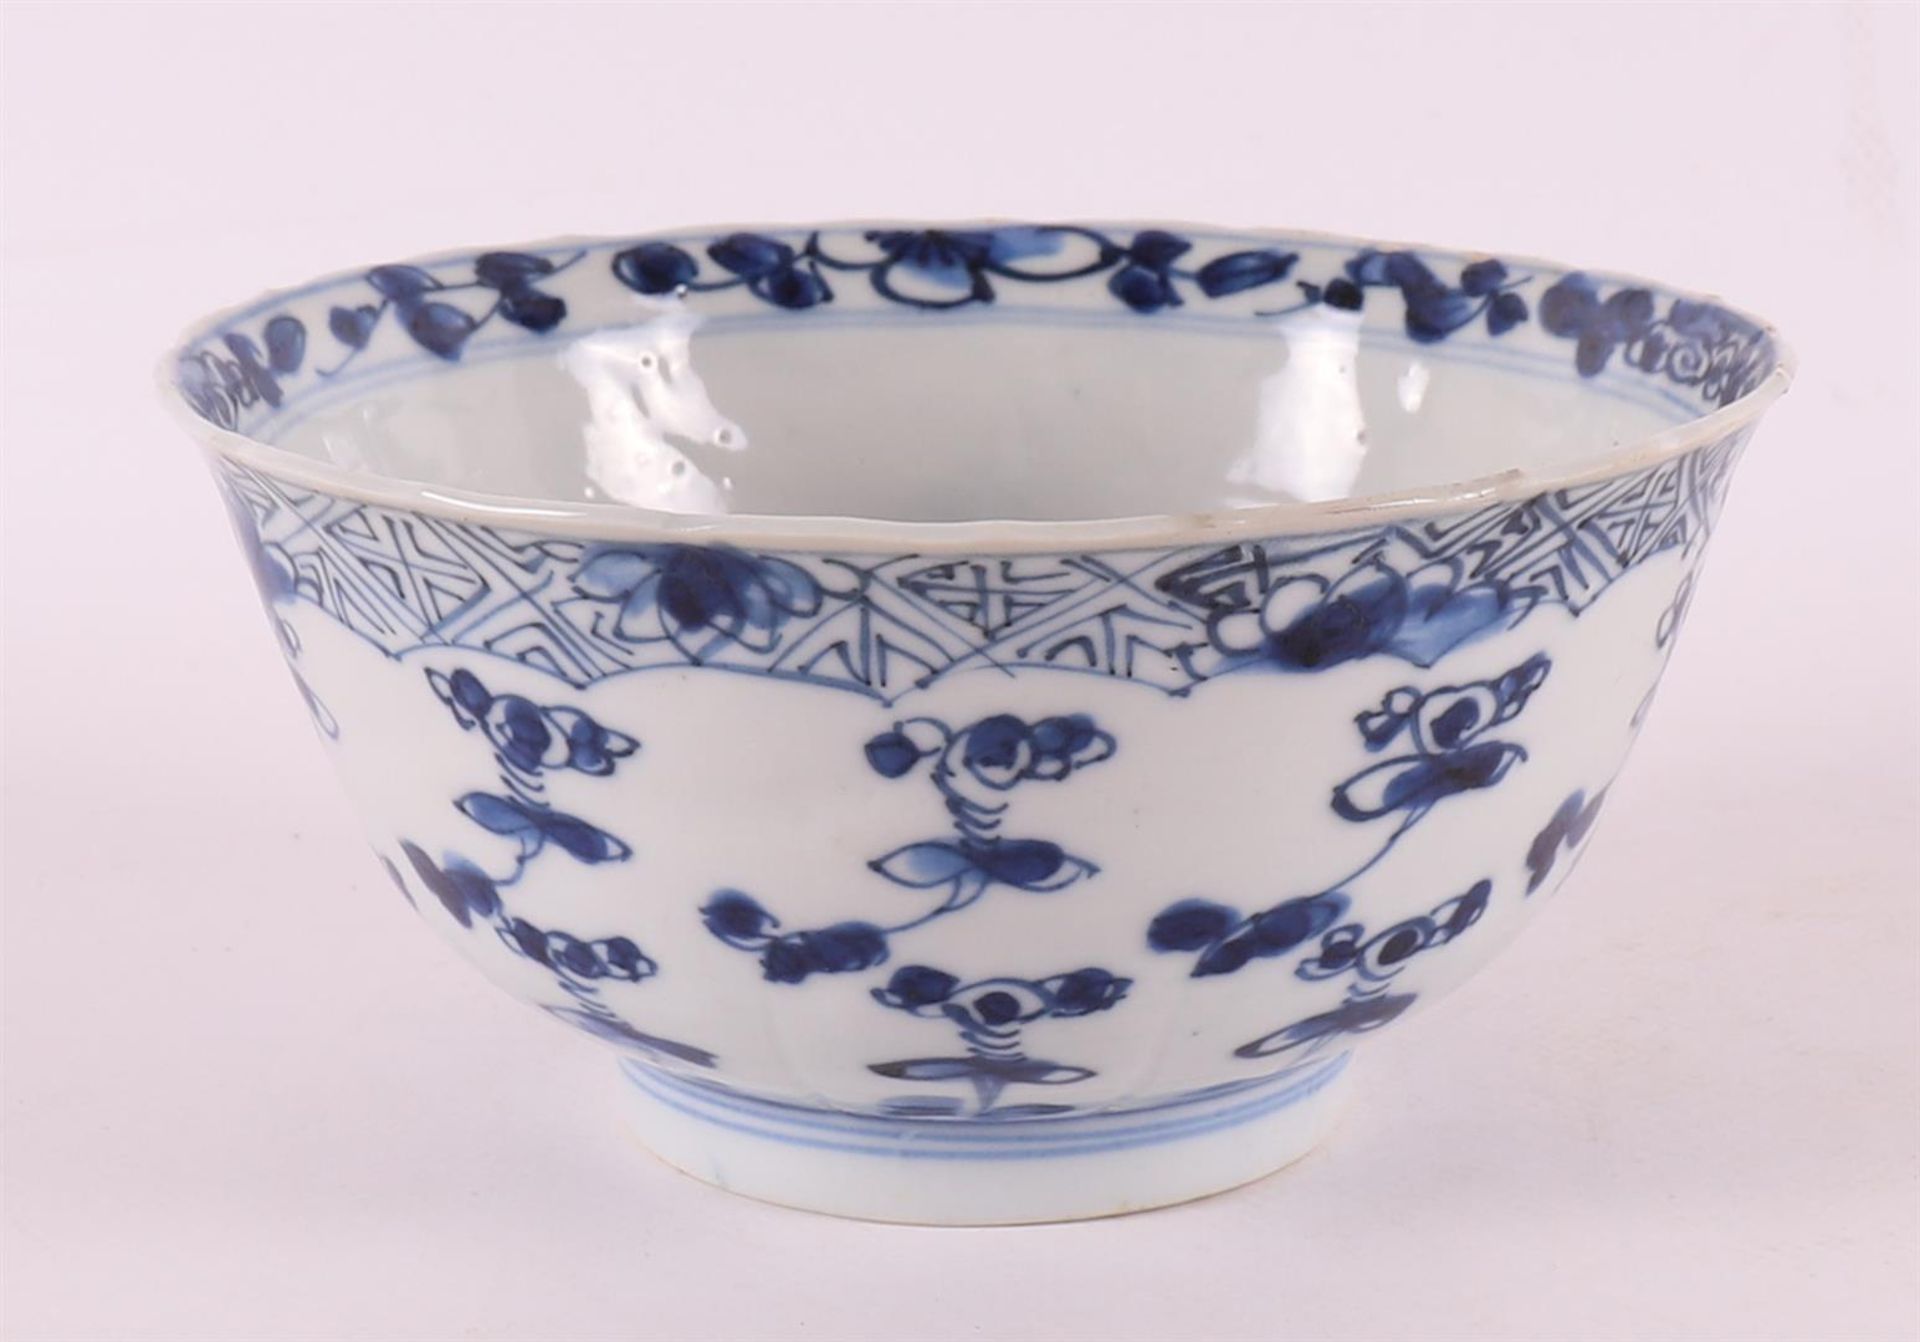 A blue and white porcelain bowl on a stand ring, China, Kangxi, around 1700.